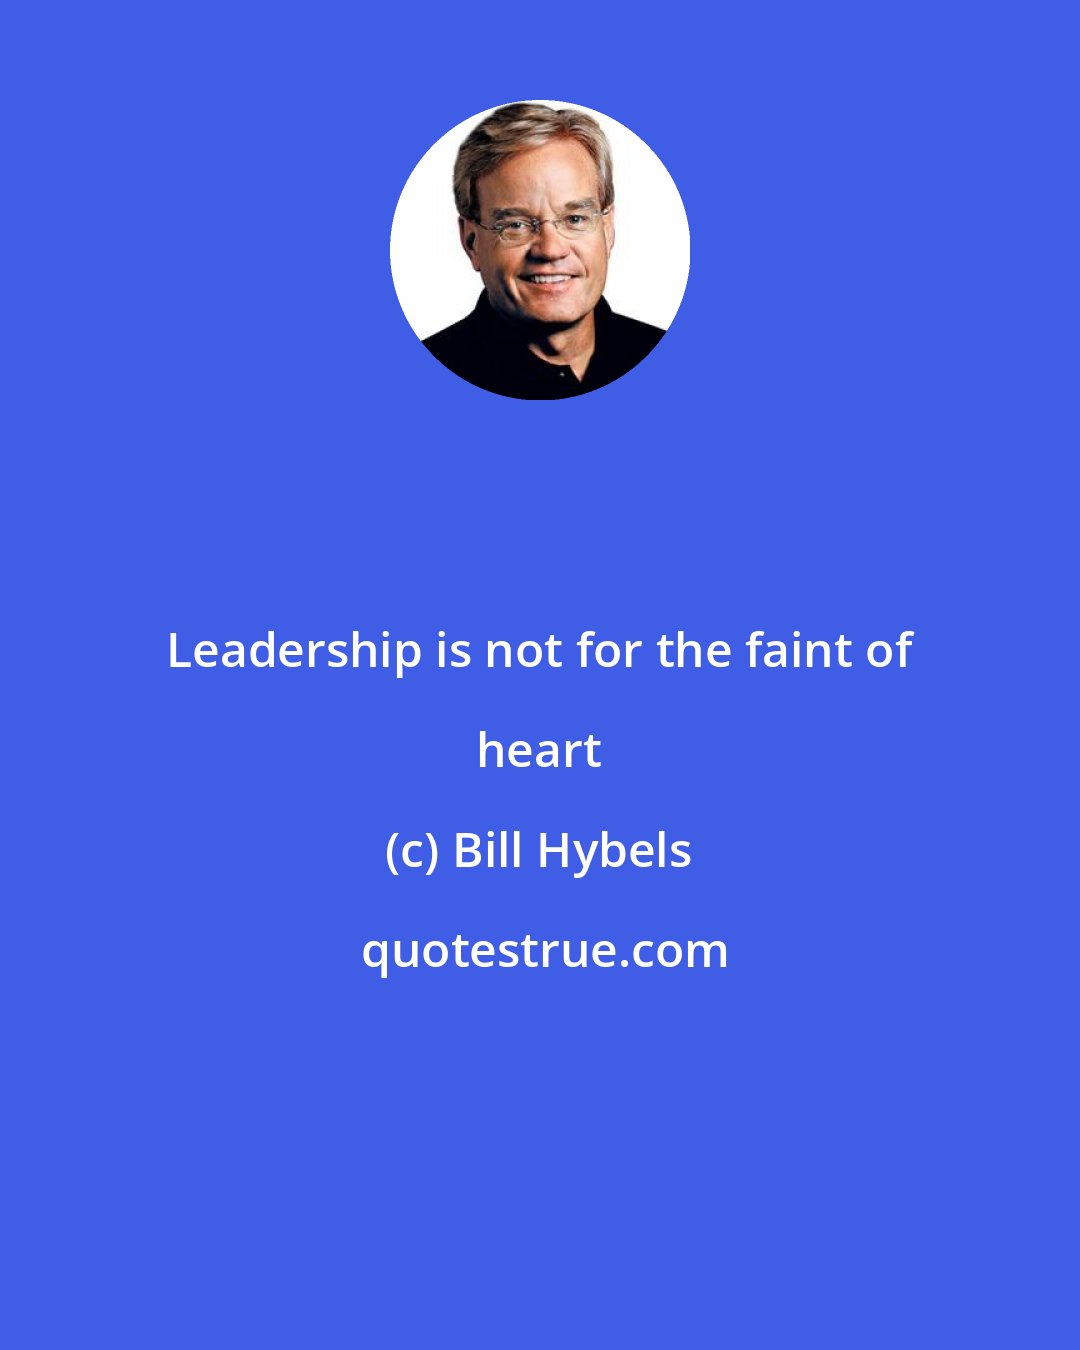 Bill Hybels: Leadership is not for the faint of heart